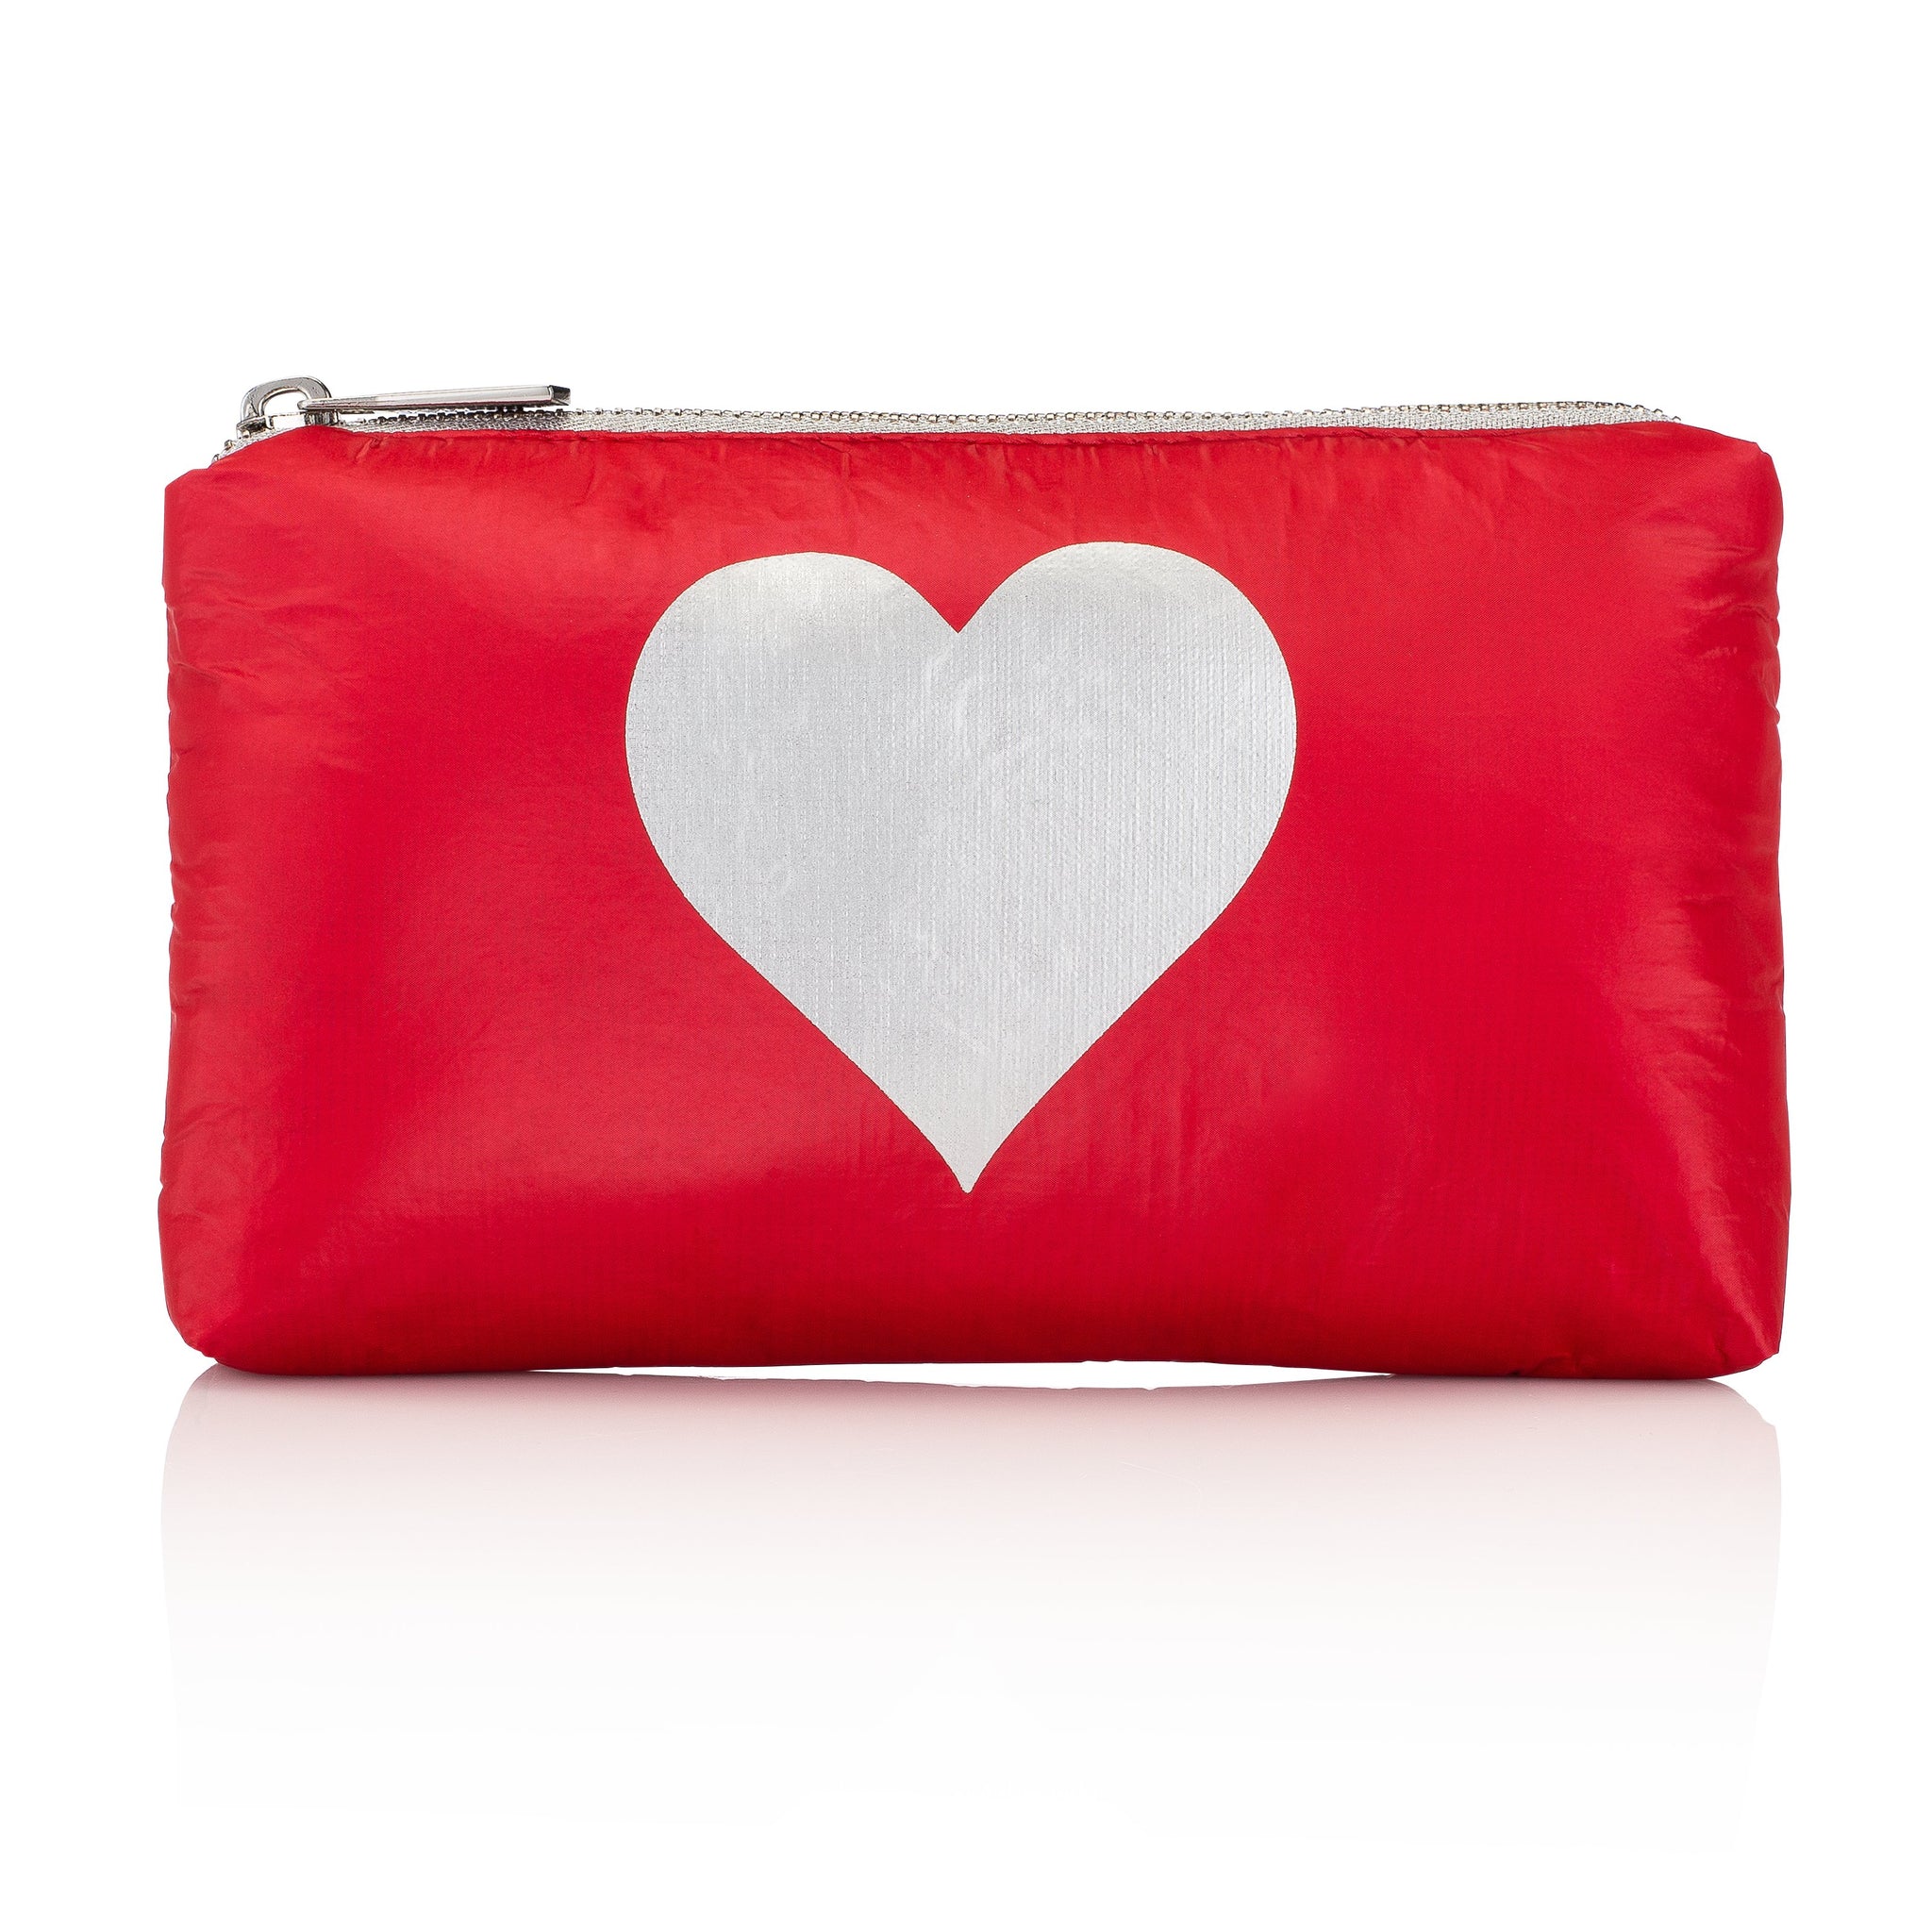 Cute Clutch - Travel Pouch - Mini Padded Pack - Chili Pepper Red with Metallic Silver Heart